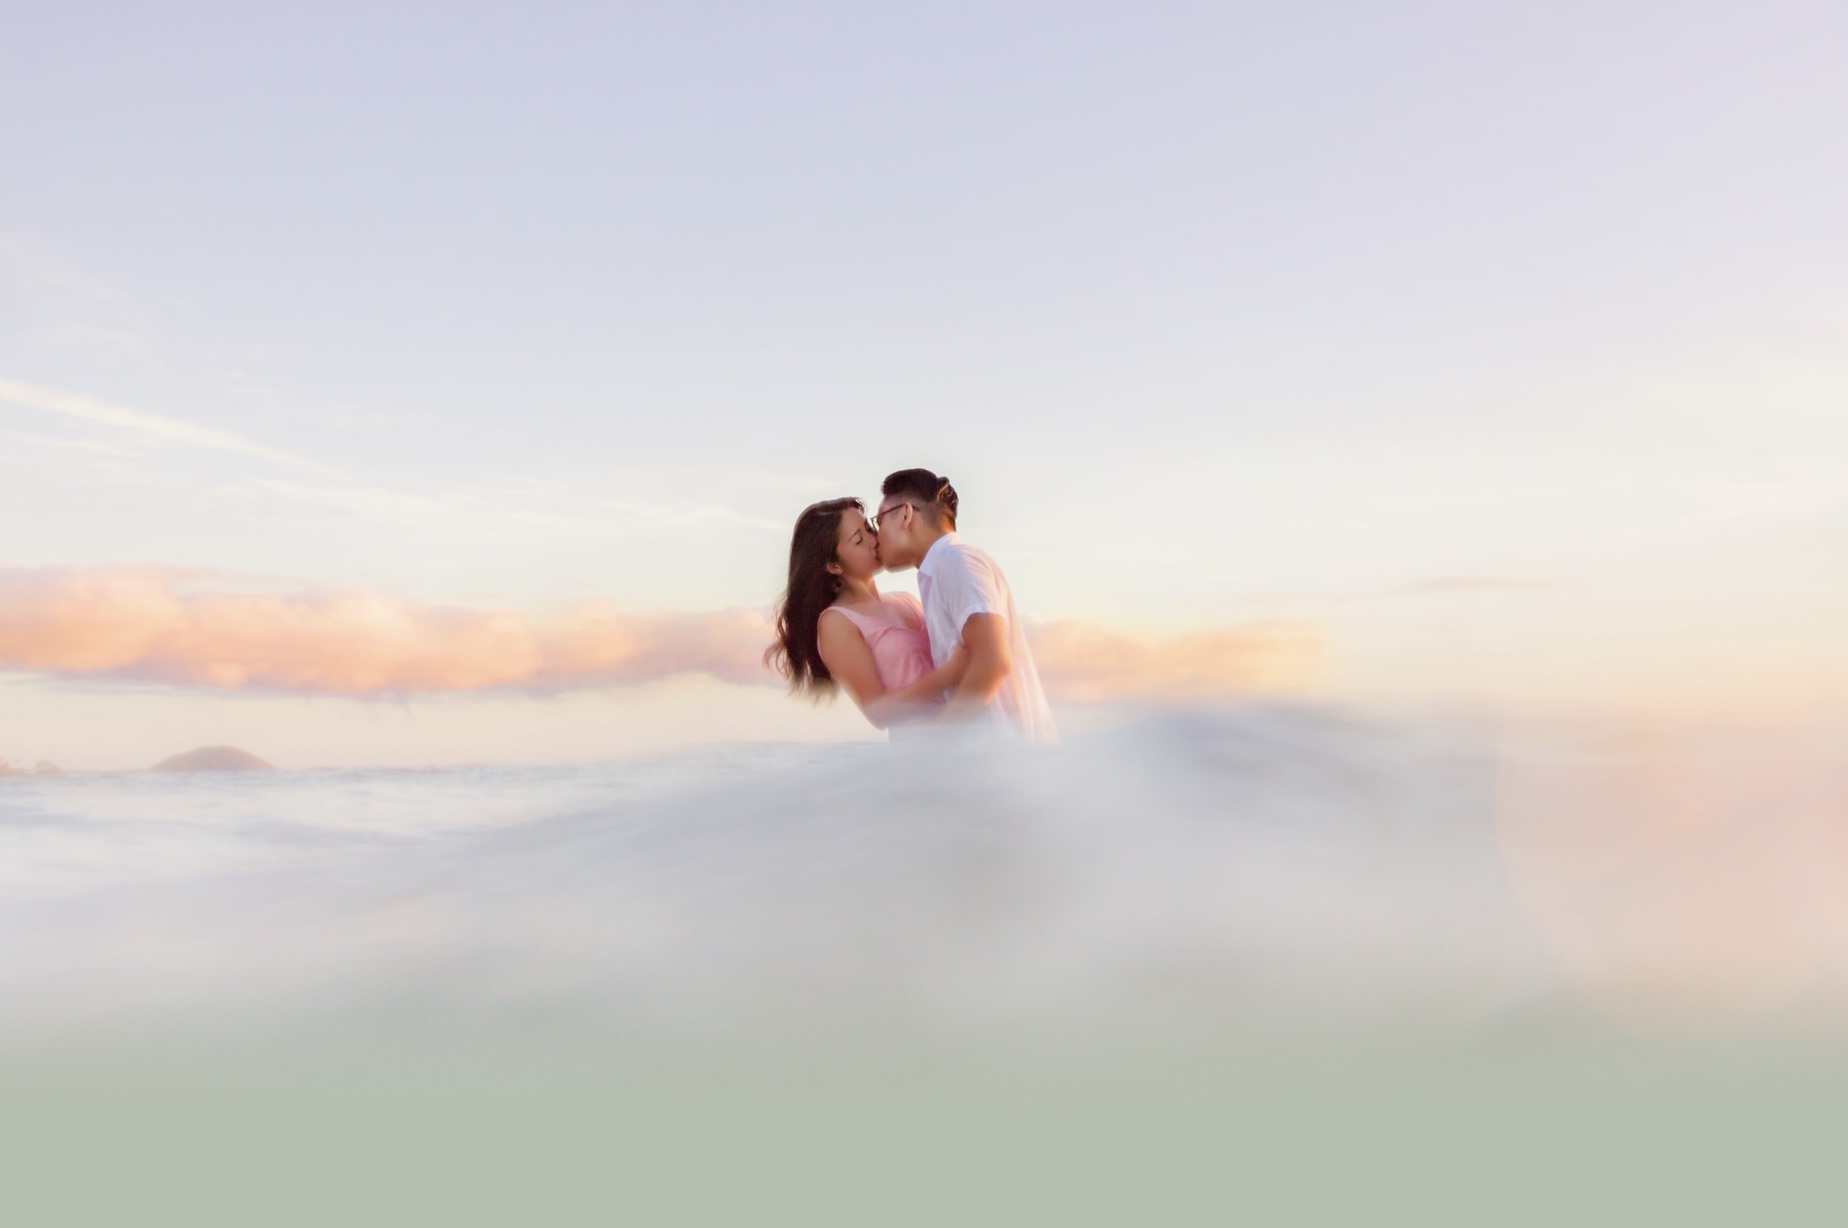 hawaii beach photoshoot idea in the ocean with couple kissing in the water